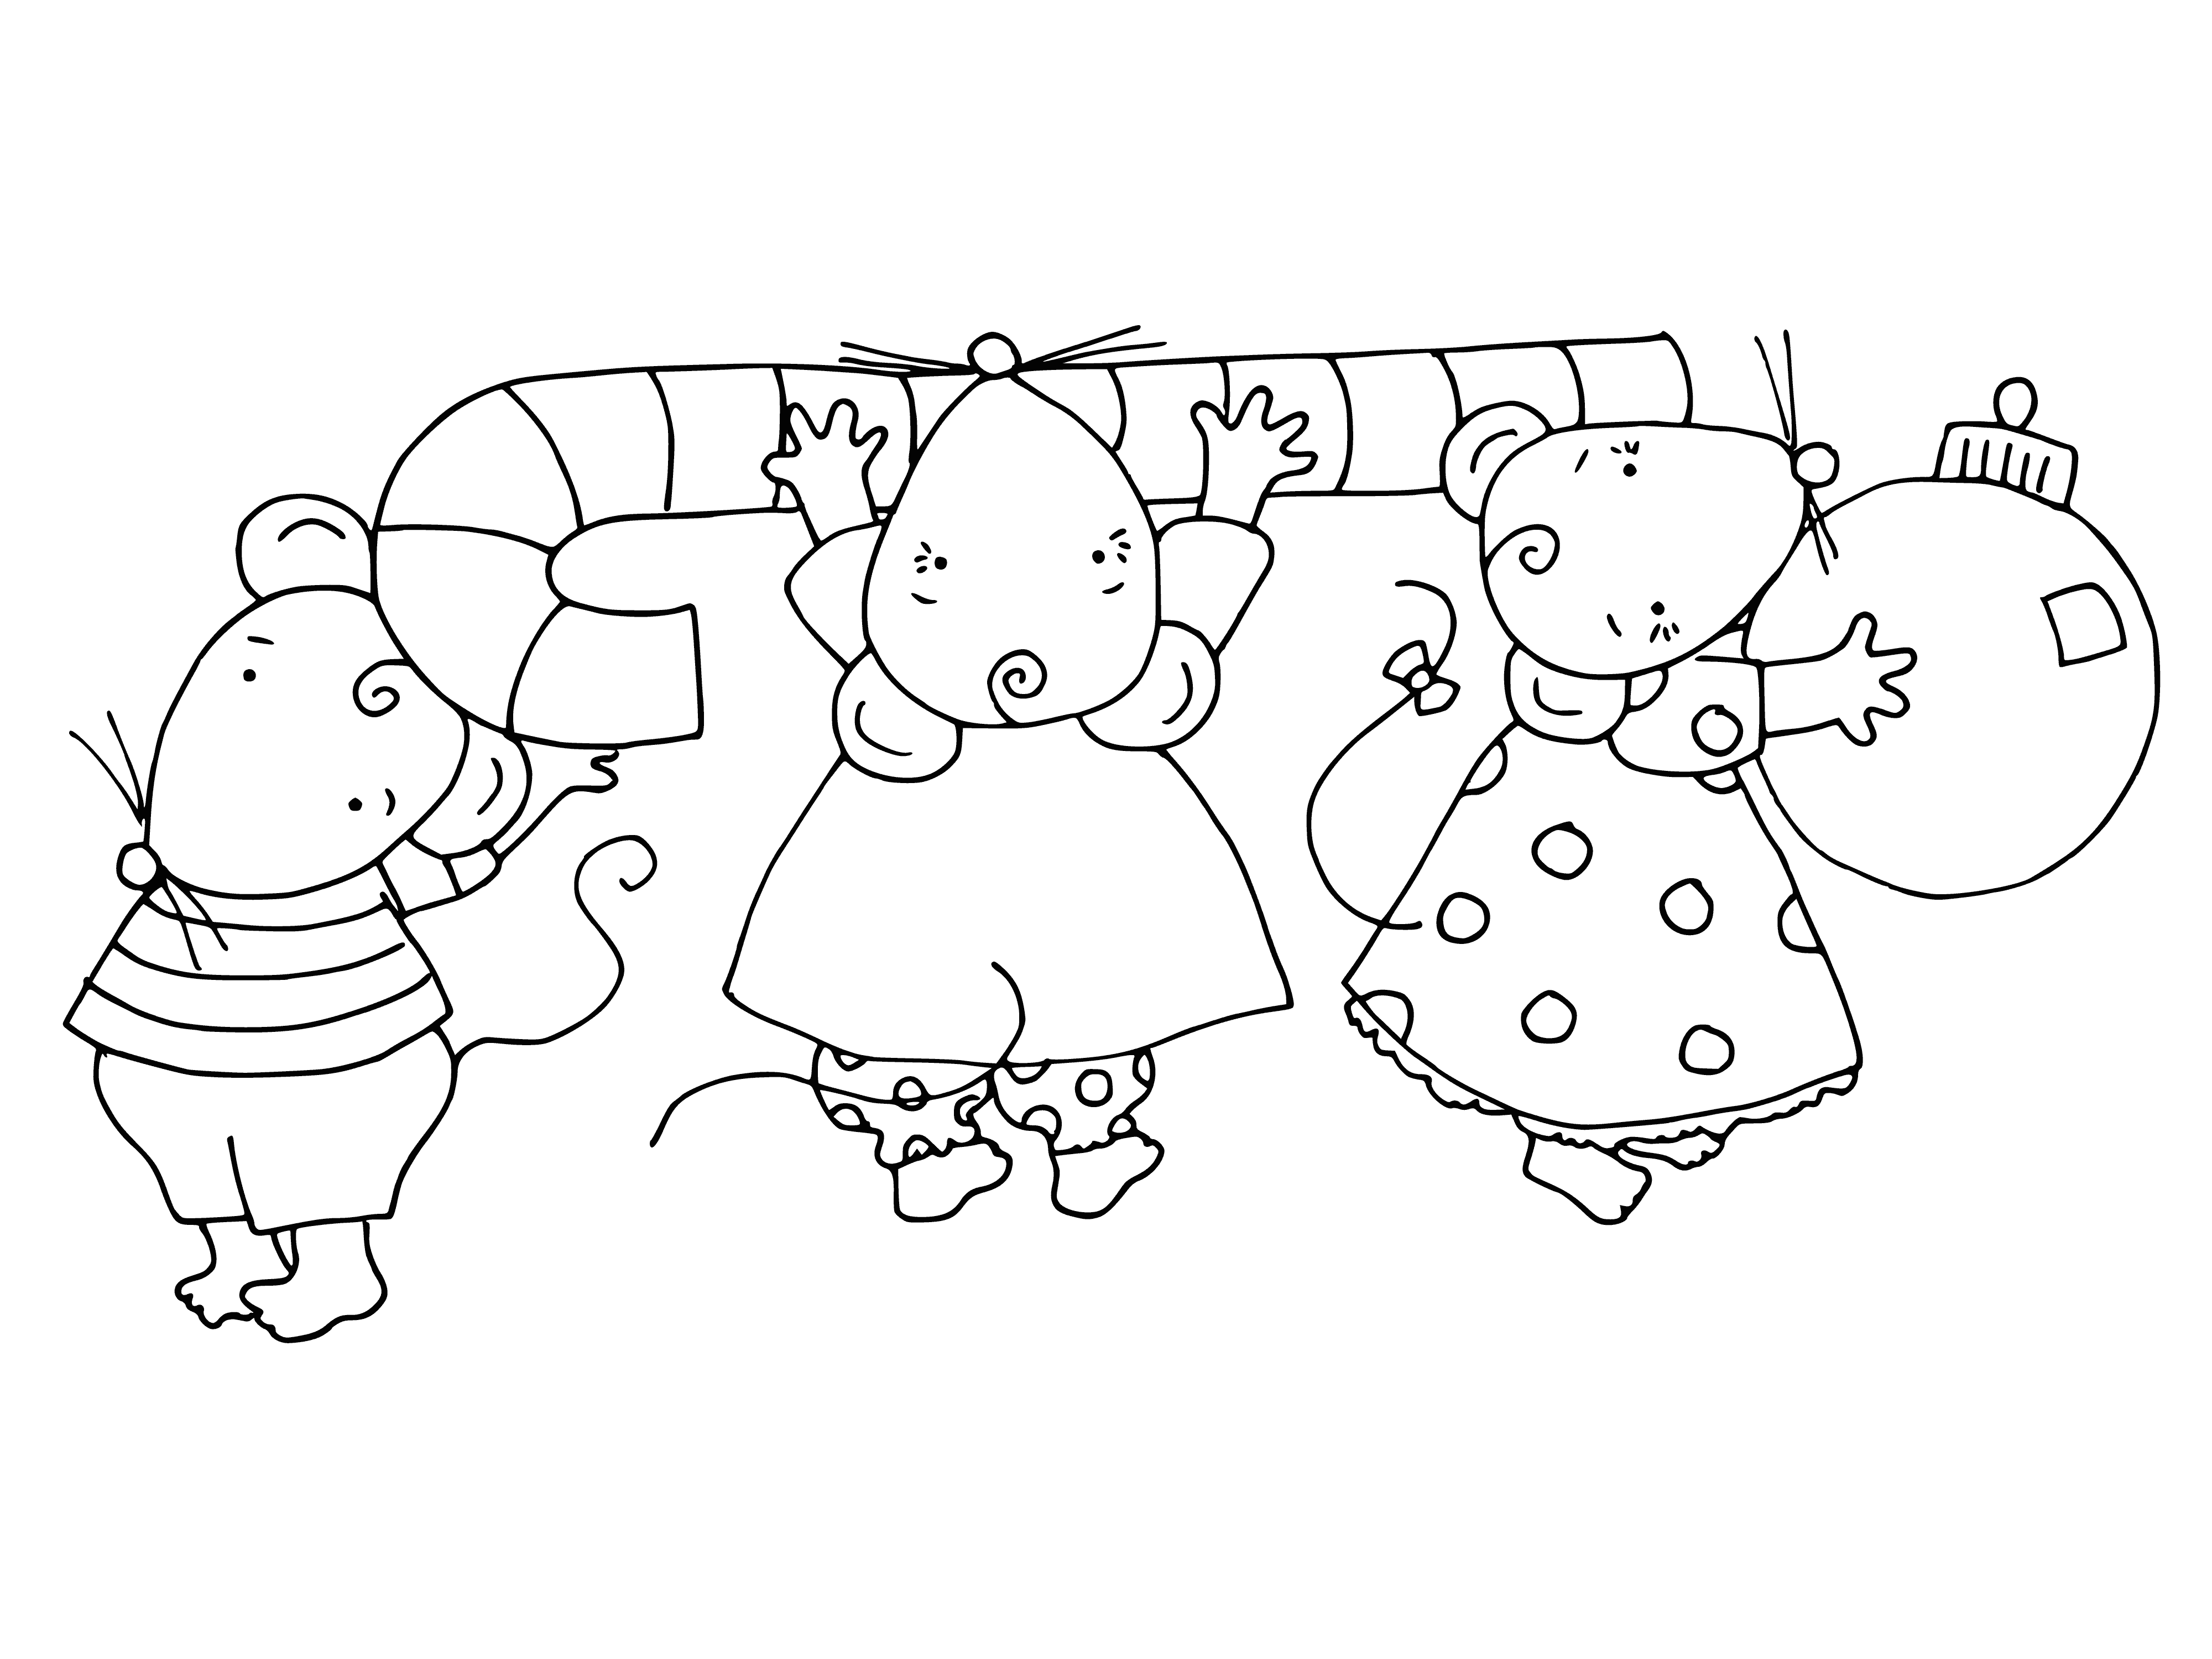 coloring page: Mice carry candy canes in mouths in Rat-year. Red/white canes carried by brown/white mice. #ChineseNewYear